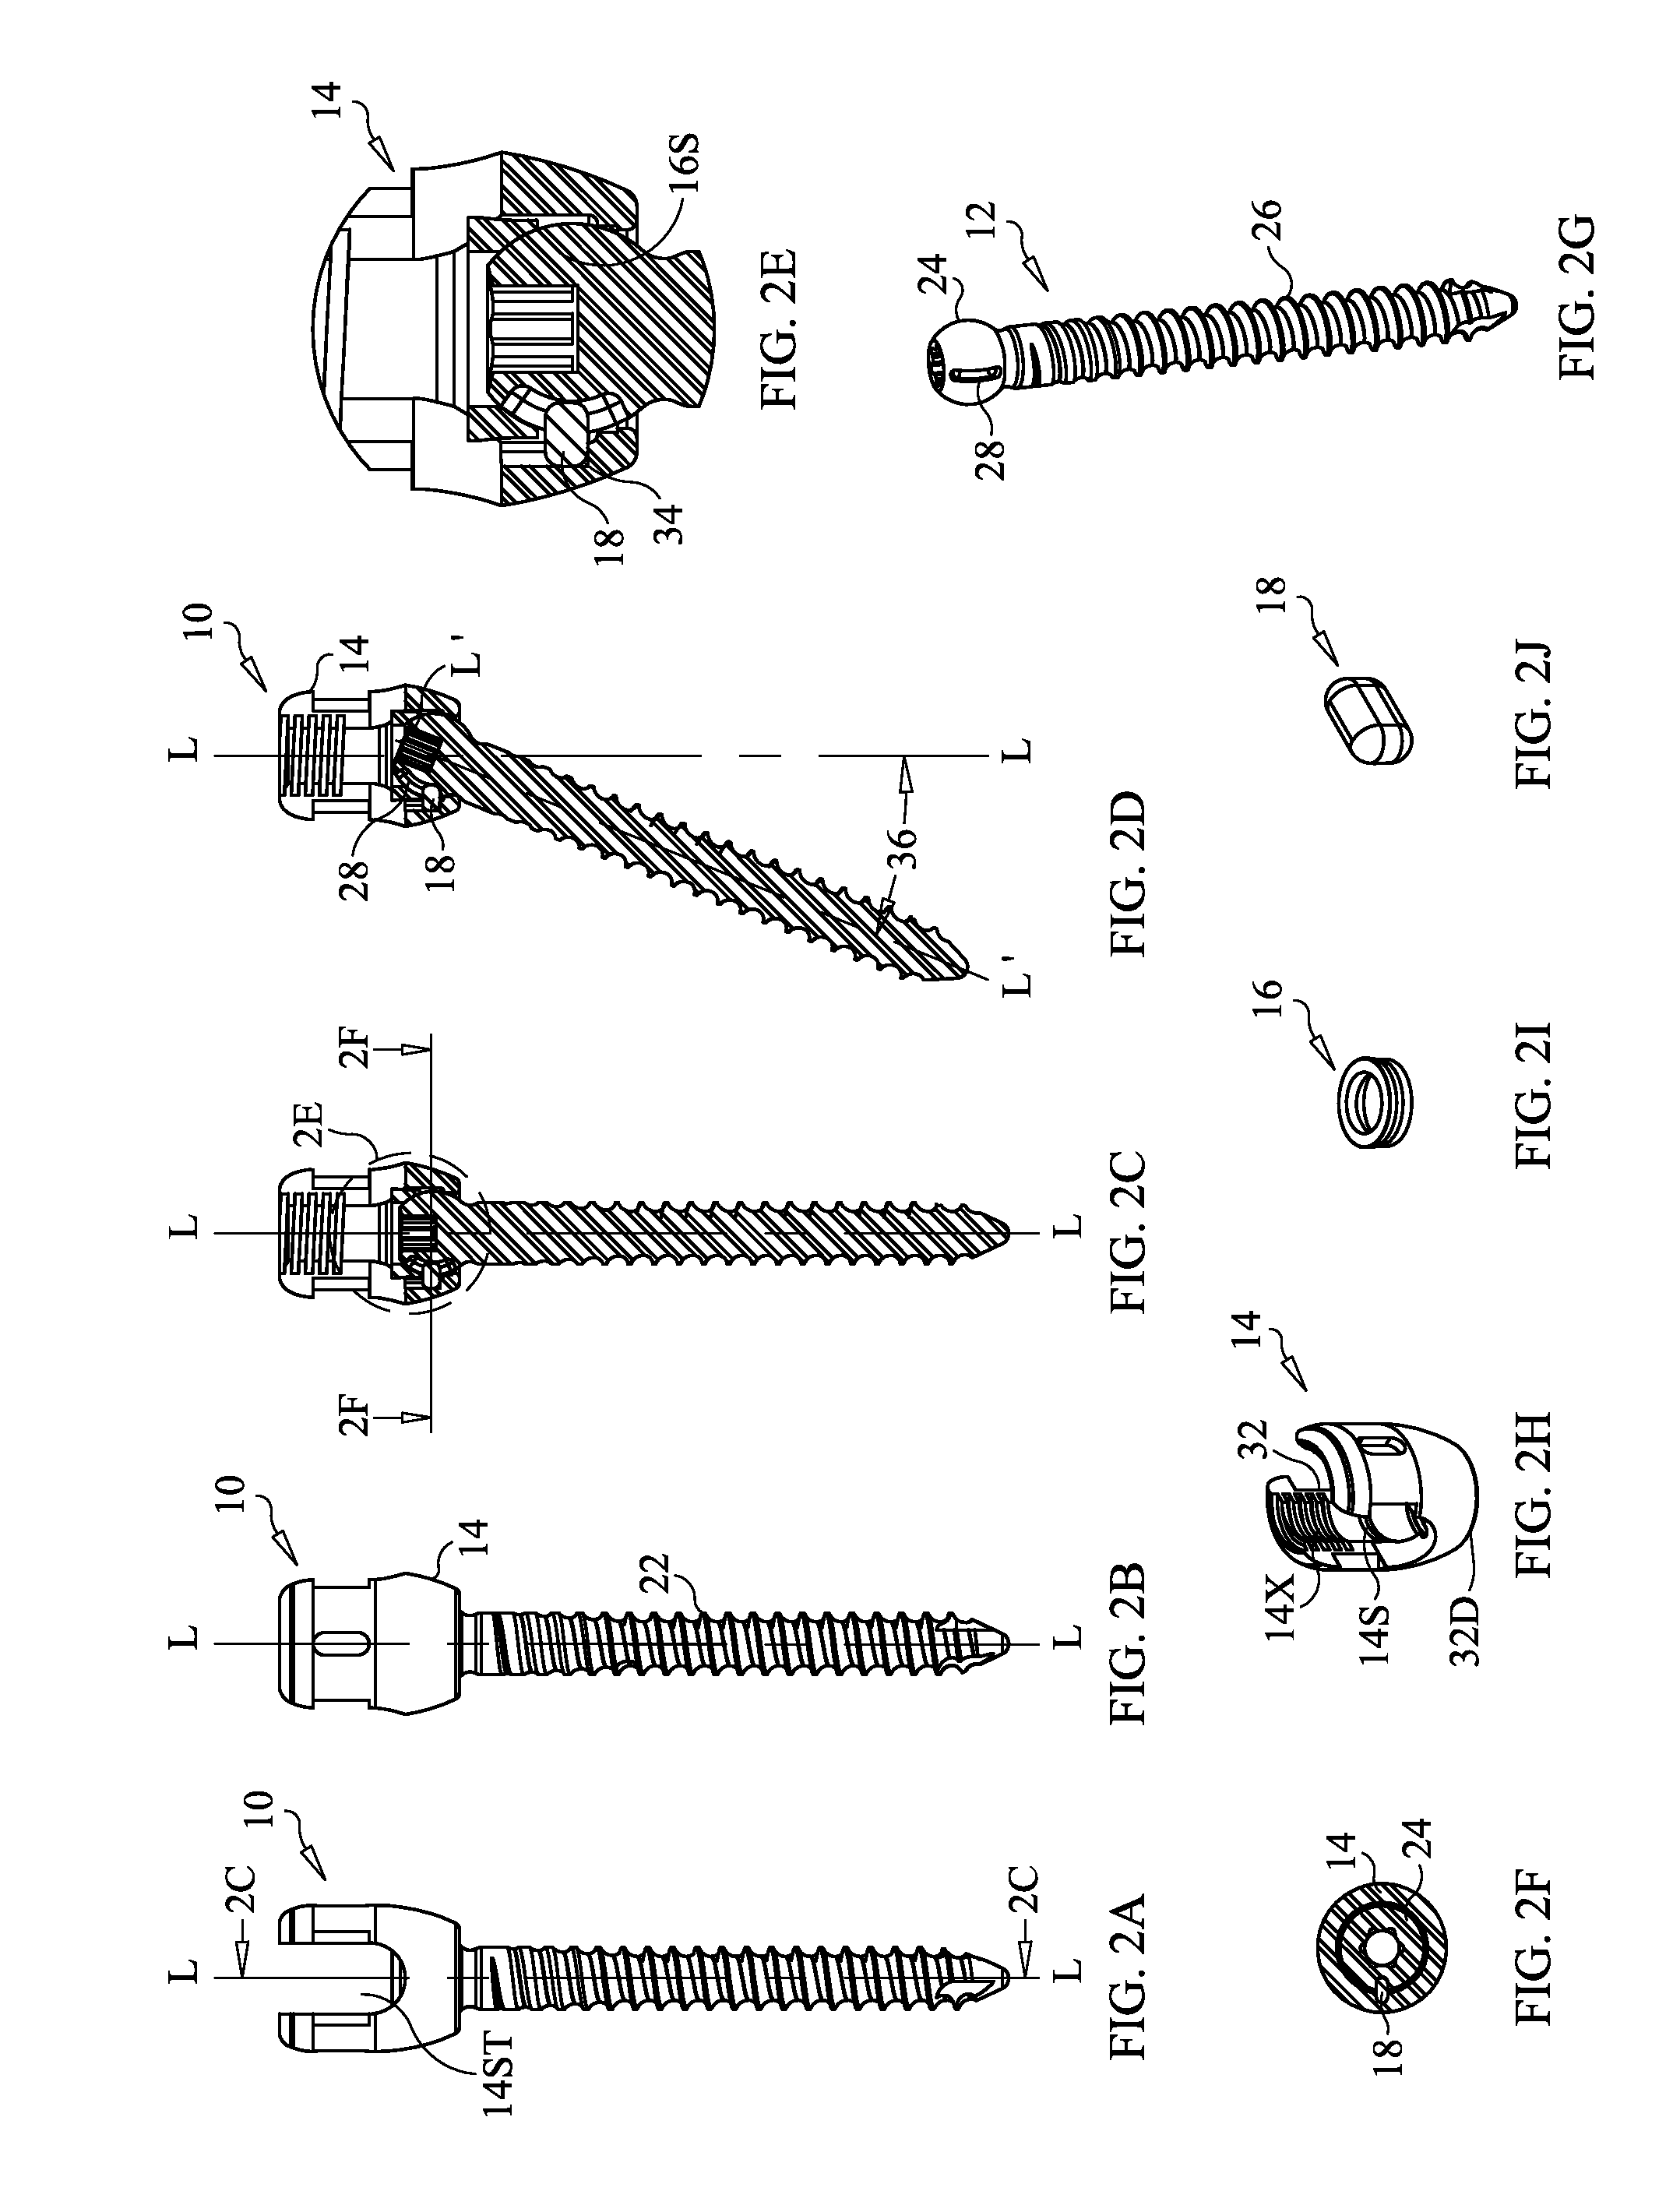 Staged Locking of Surgical Screw Assembly